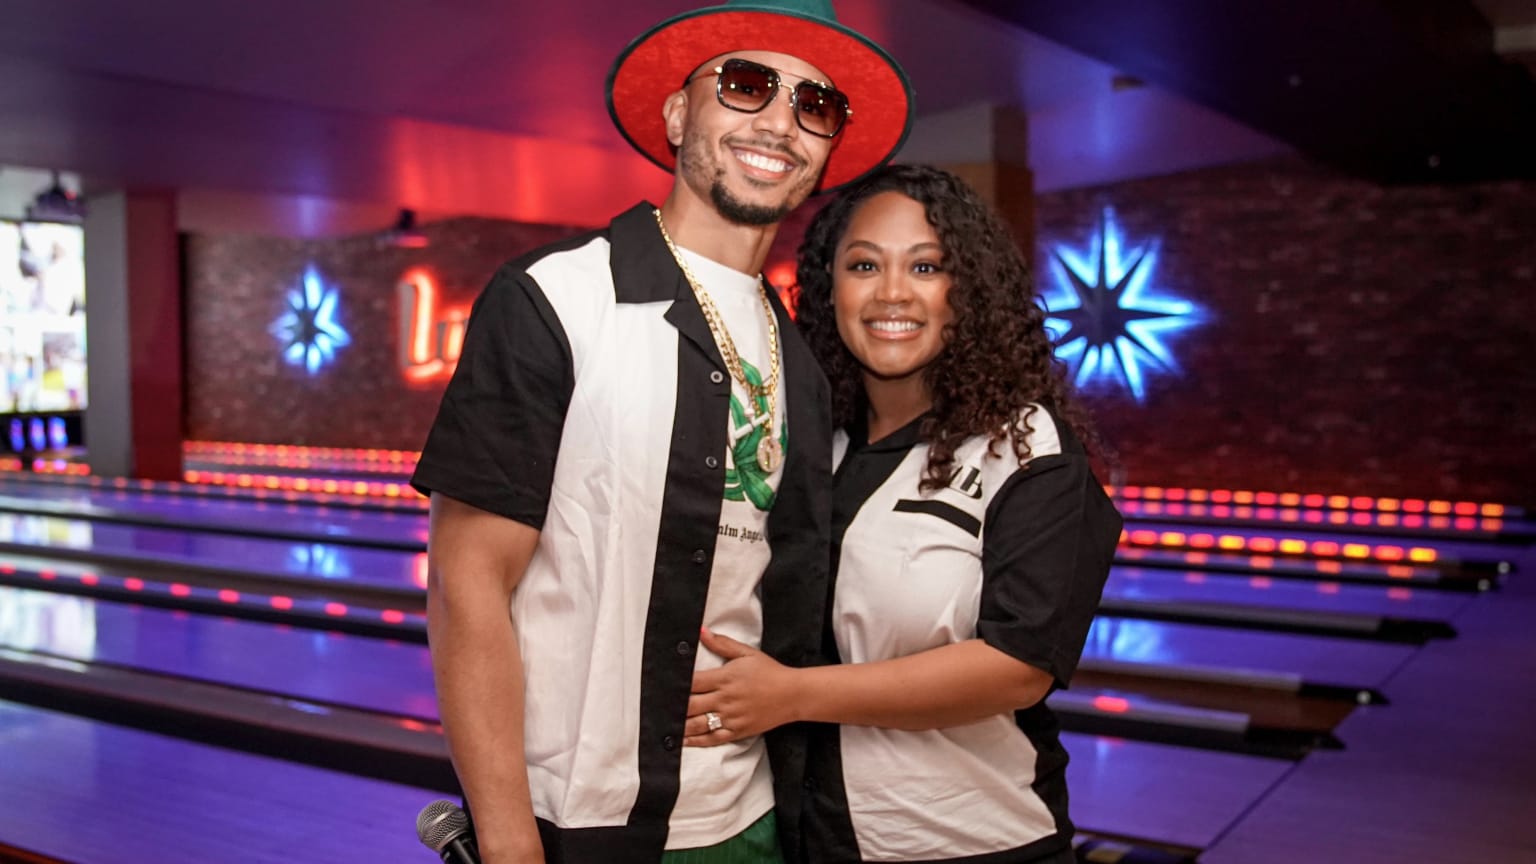 Mookie Betts poses for a photo with his wife Brianna at a bowling alley